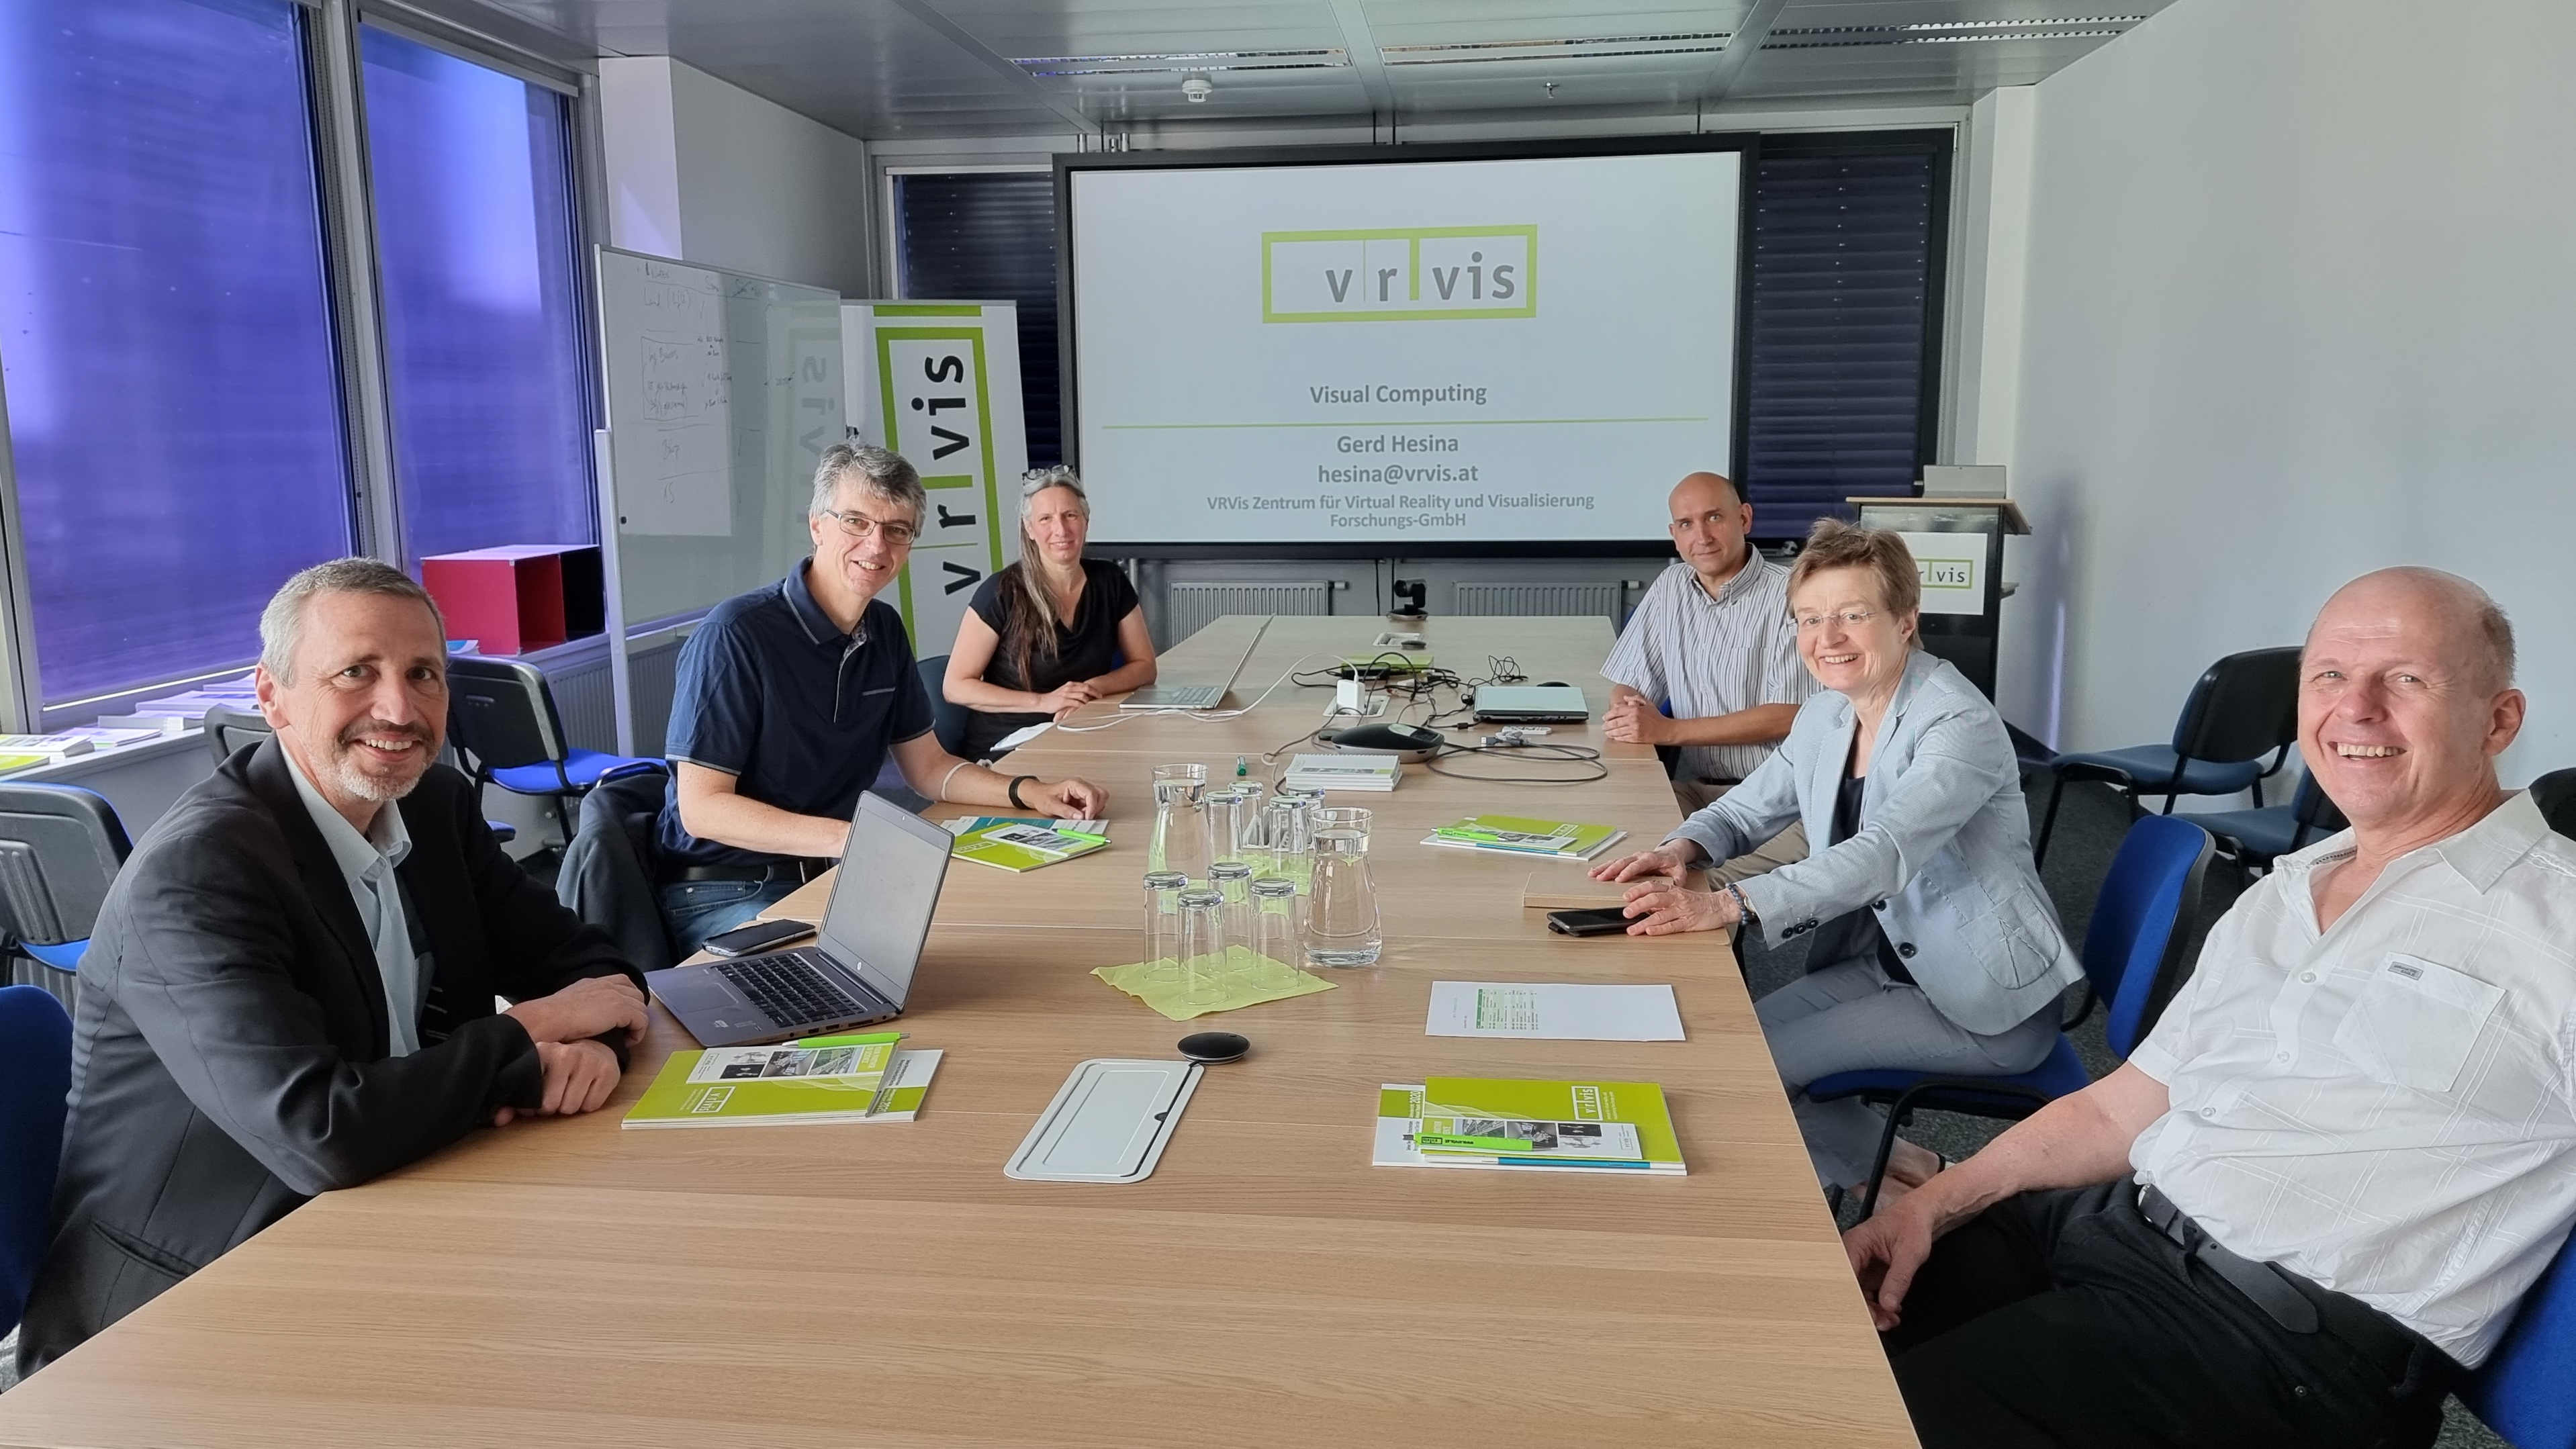 A group of researchers at a long table. At the end is a screen with the VRVis logo.